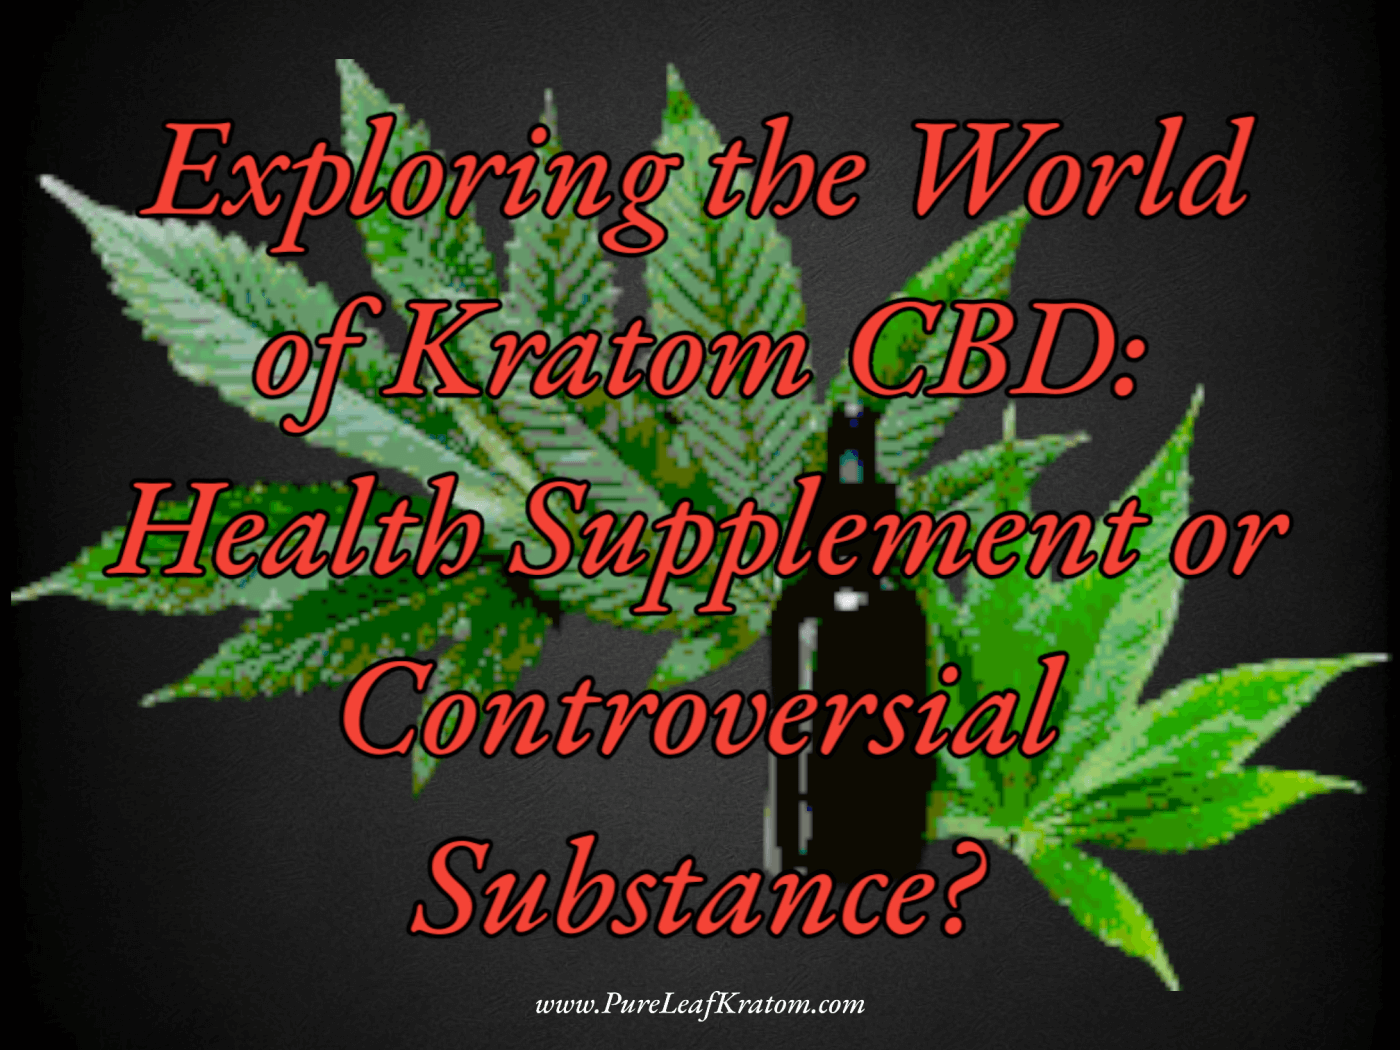 Exploring the World of Kratom CBD: Health Supplement or Controversial Substance?